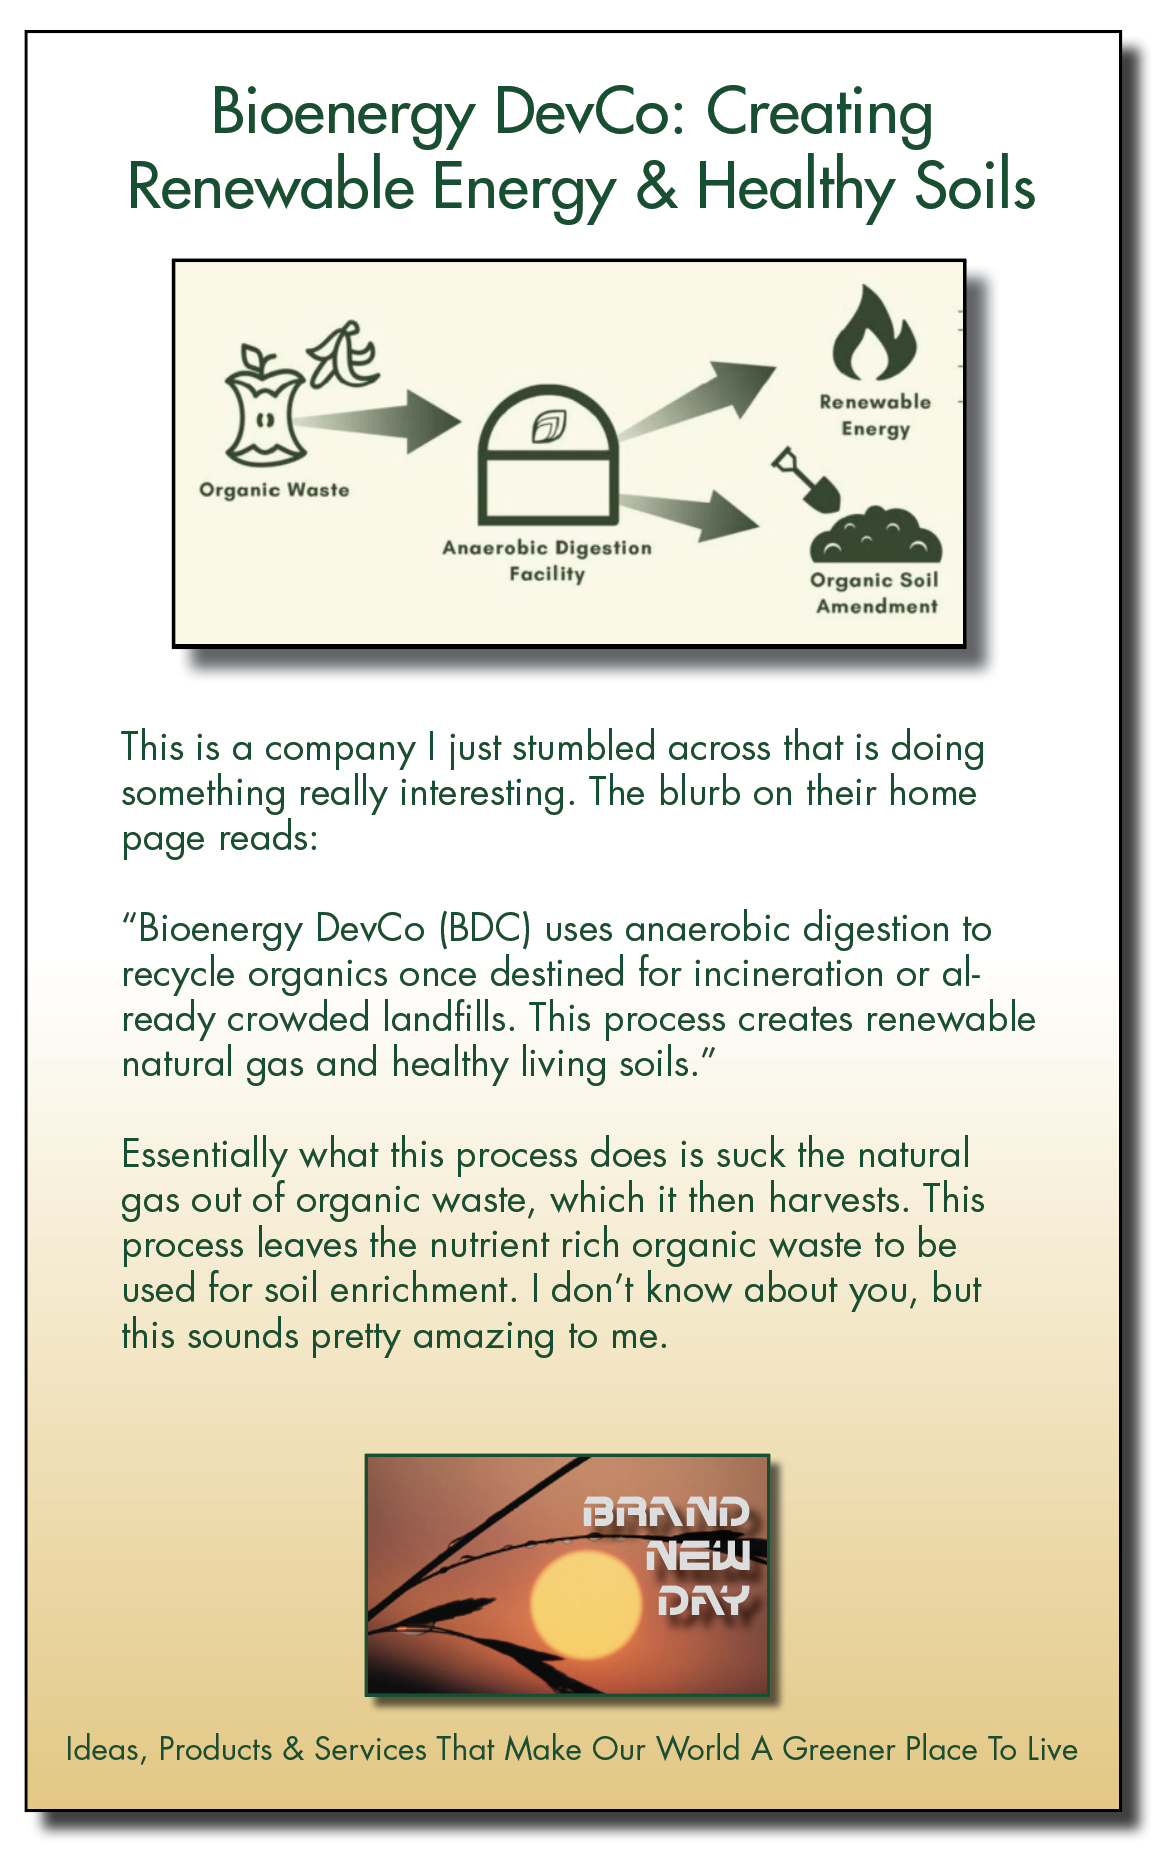 Bioenergy DevCo: Creating
Renewable Energy & = Soils

Re: &
a”
Organic Waste

Anaerobic —

Facility 2 Soil

Amendment

This is a company | just stumbled across that is doing
something really interesting. The blurb on their home
page reads:

“Bioenergy DevCo (BDC) uses anaerobic digestion to
recycle organics once destined for incineration or al-
ready crowded landfills. This process creates renewable
natural gas and healthy living soils.”

Essentially what this process does is suck the natural
gas out of organic waste, which it then harvests. This
process leaves the nutrient rich organic waste to be
used for soil enrichment. | don’t know about you, but
this sounds pretty amazing to me.

ER [P]
NEl
CE

Ideas, Products & Services That Make Our World A Greener Place To Live